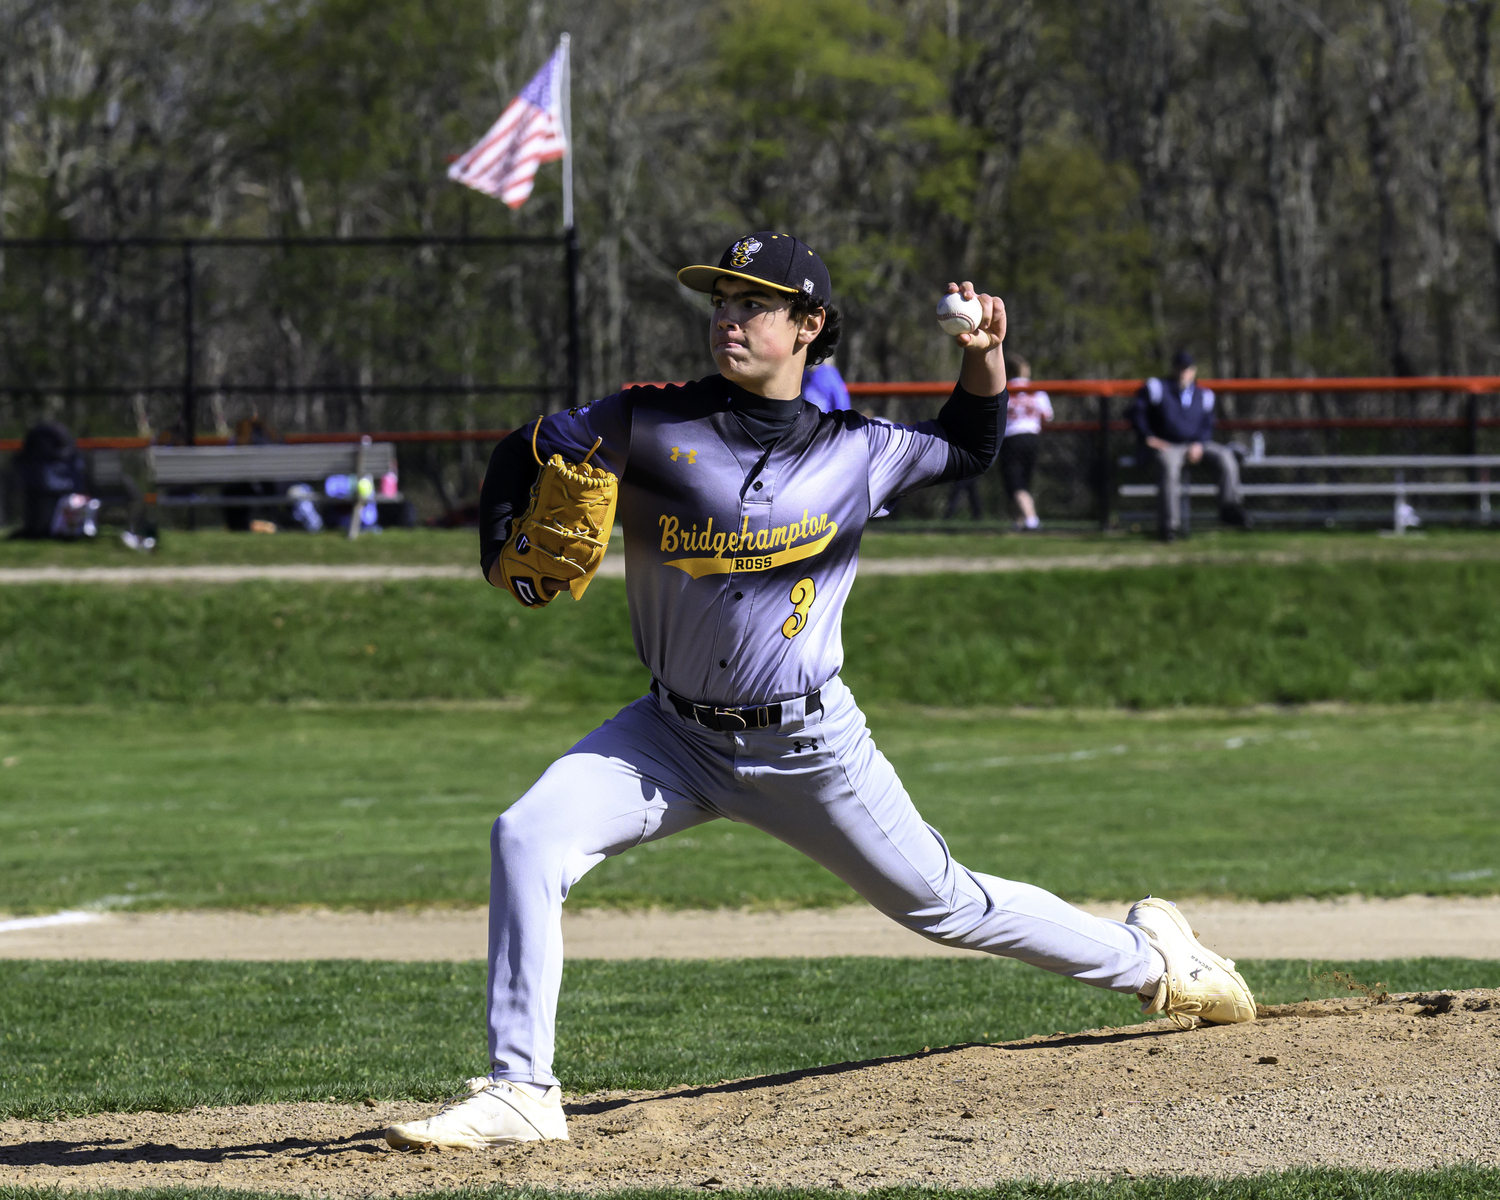 Ross freshman Elliot McGonegal pitching in the second game of the series at Mashashimuet Park in Sag Harbor on May 1.   MARIANNE BARNETT